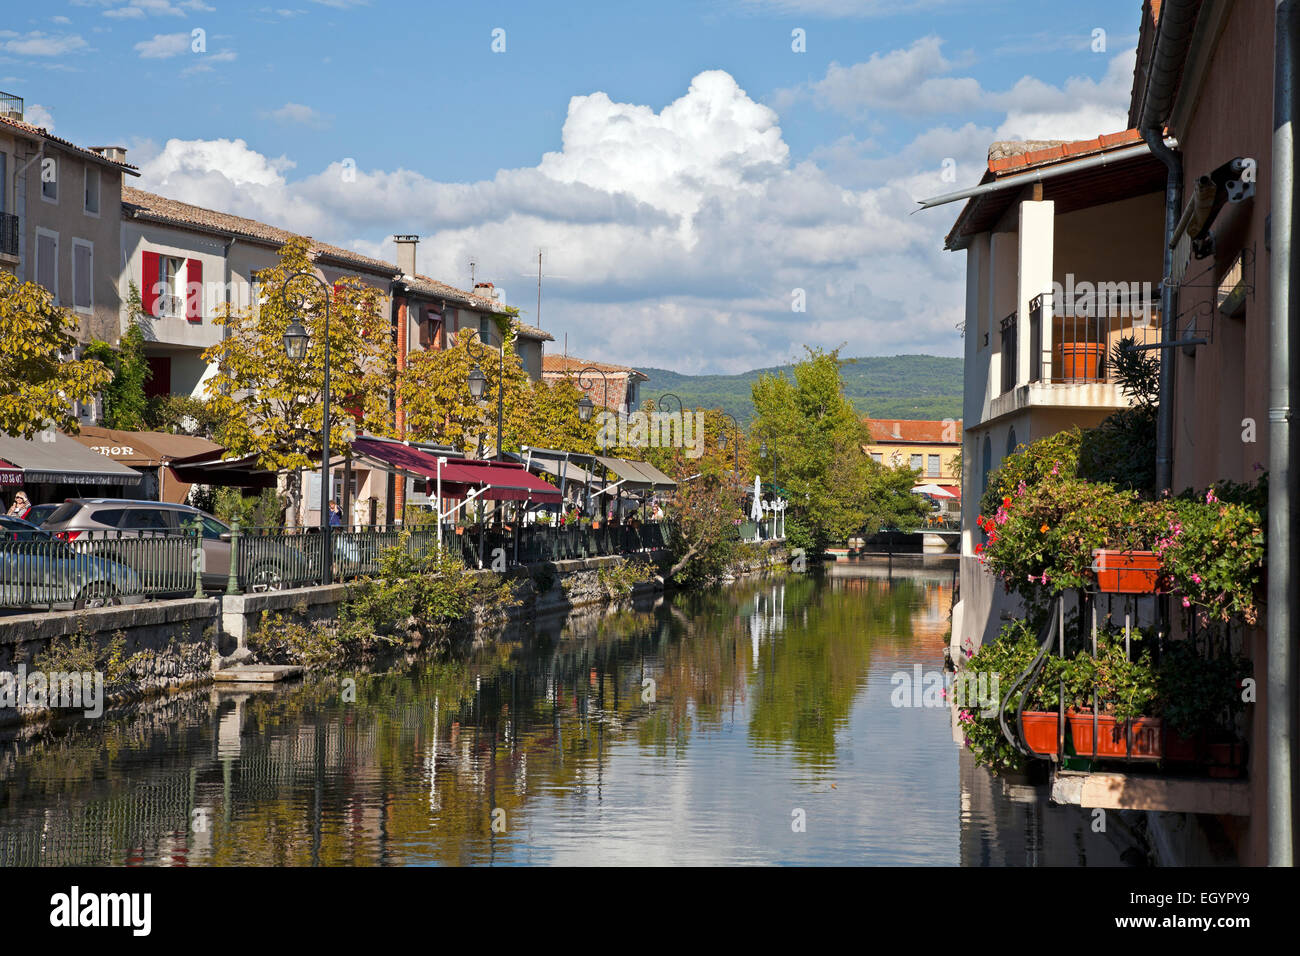 Town life goes on along the banks of the Sorgue River in the Vaucluse district of Southern France.  A shopping hub for antique., Stock Photo